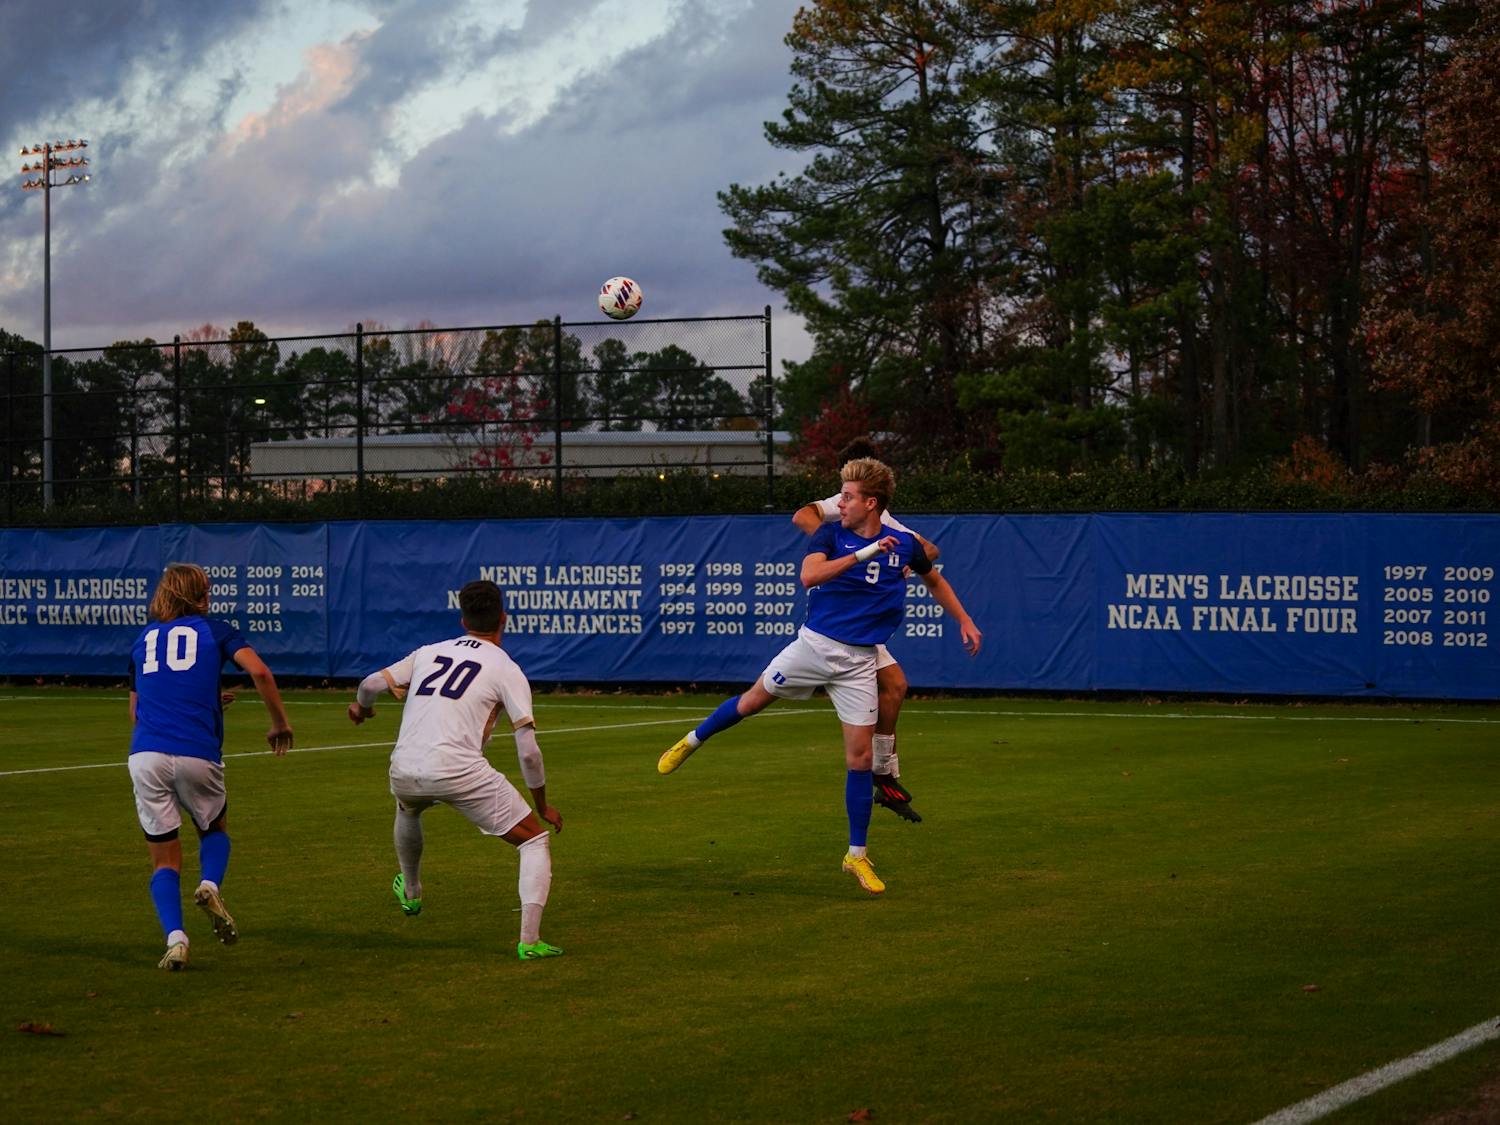 Senior forward Scotty Taylor (center) scored the match's only goal late in the first half.